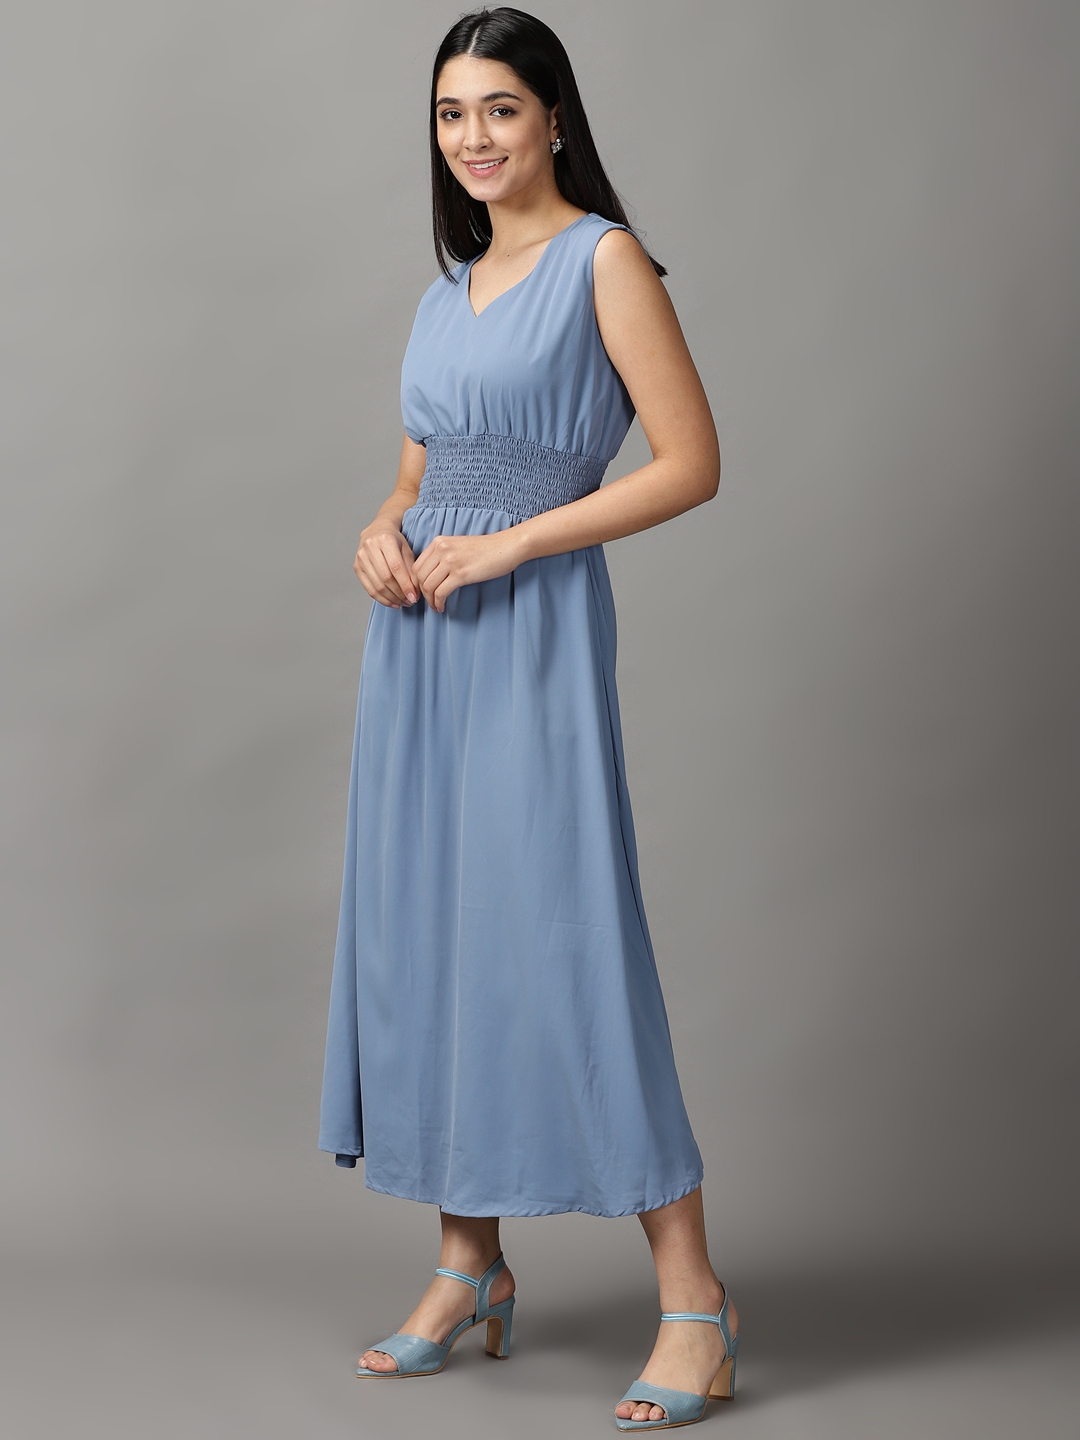 Women's Blue Polyester Solid Dresses